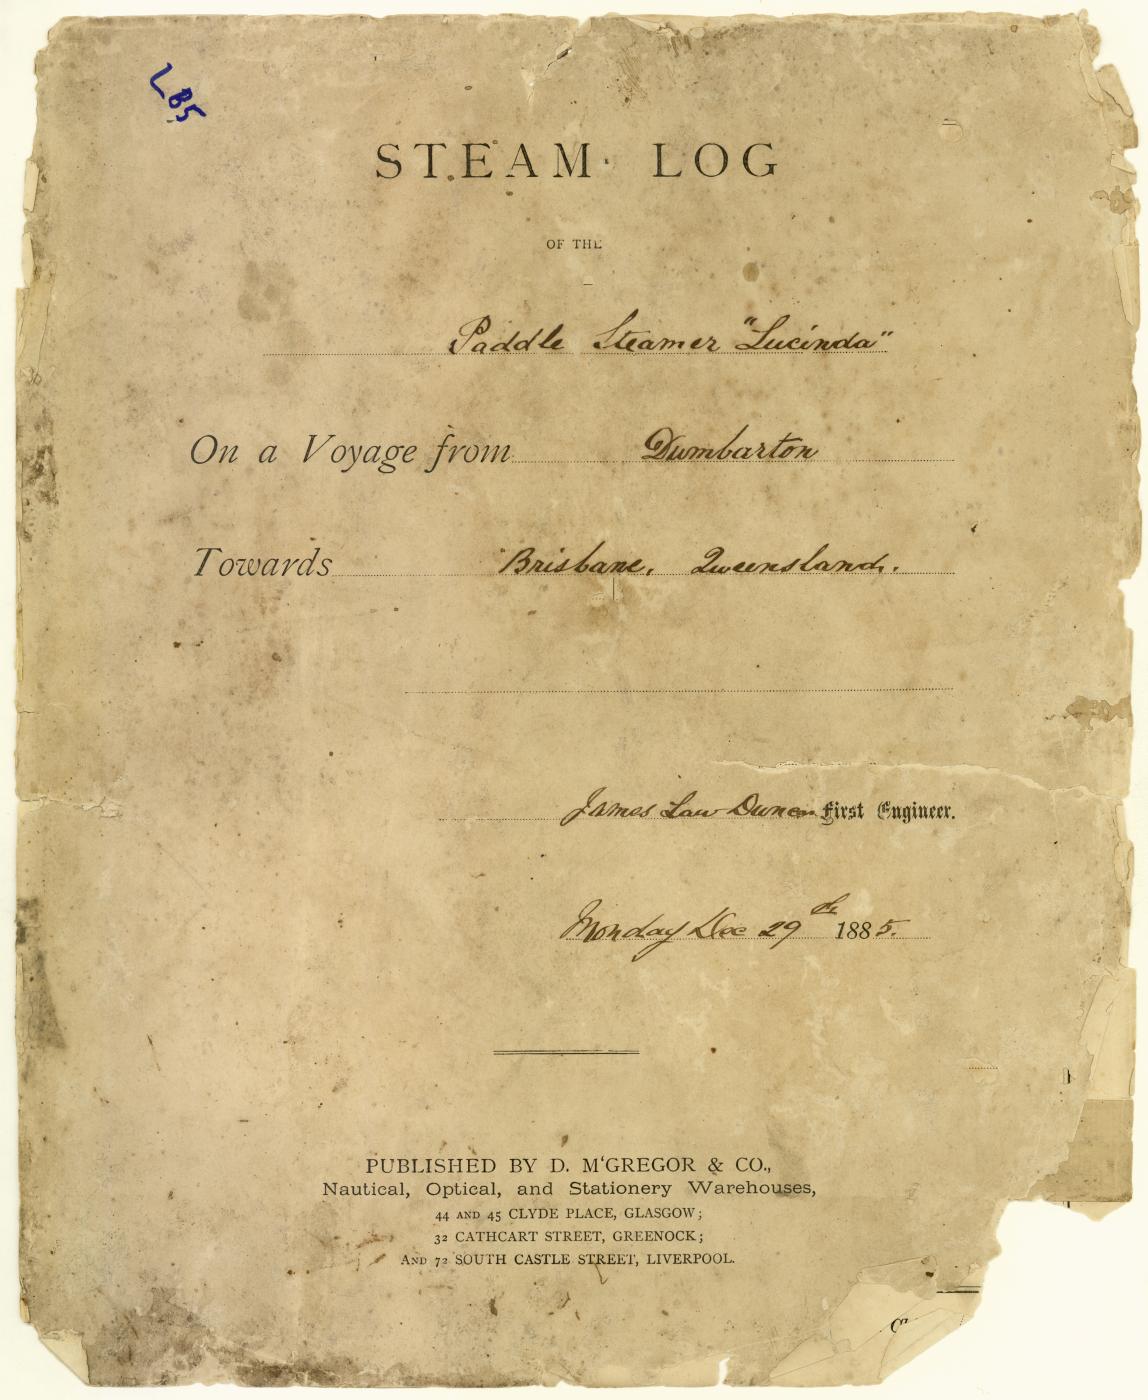 Extract from the logbook of the Queensland Government Steam Yacht Lucinda kept by the Chief Engineer on a voyage from Dumbarton towards Brisbane.